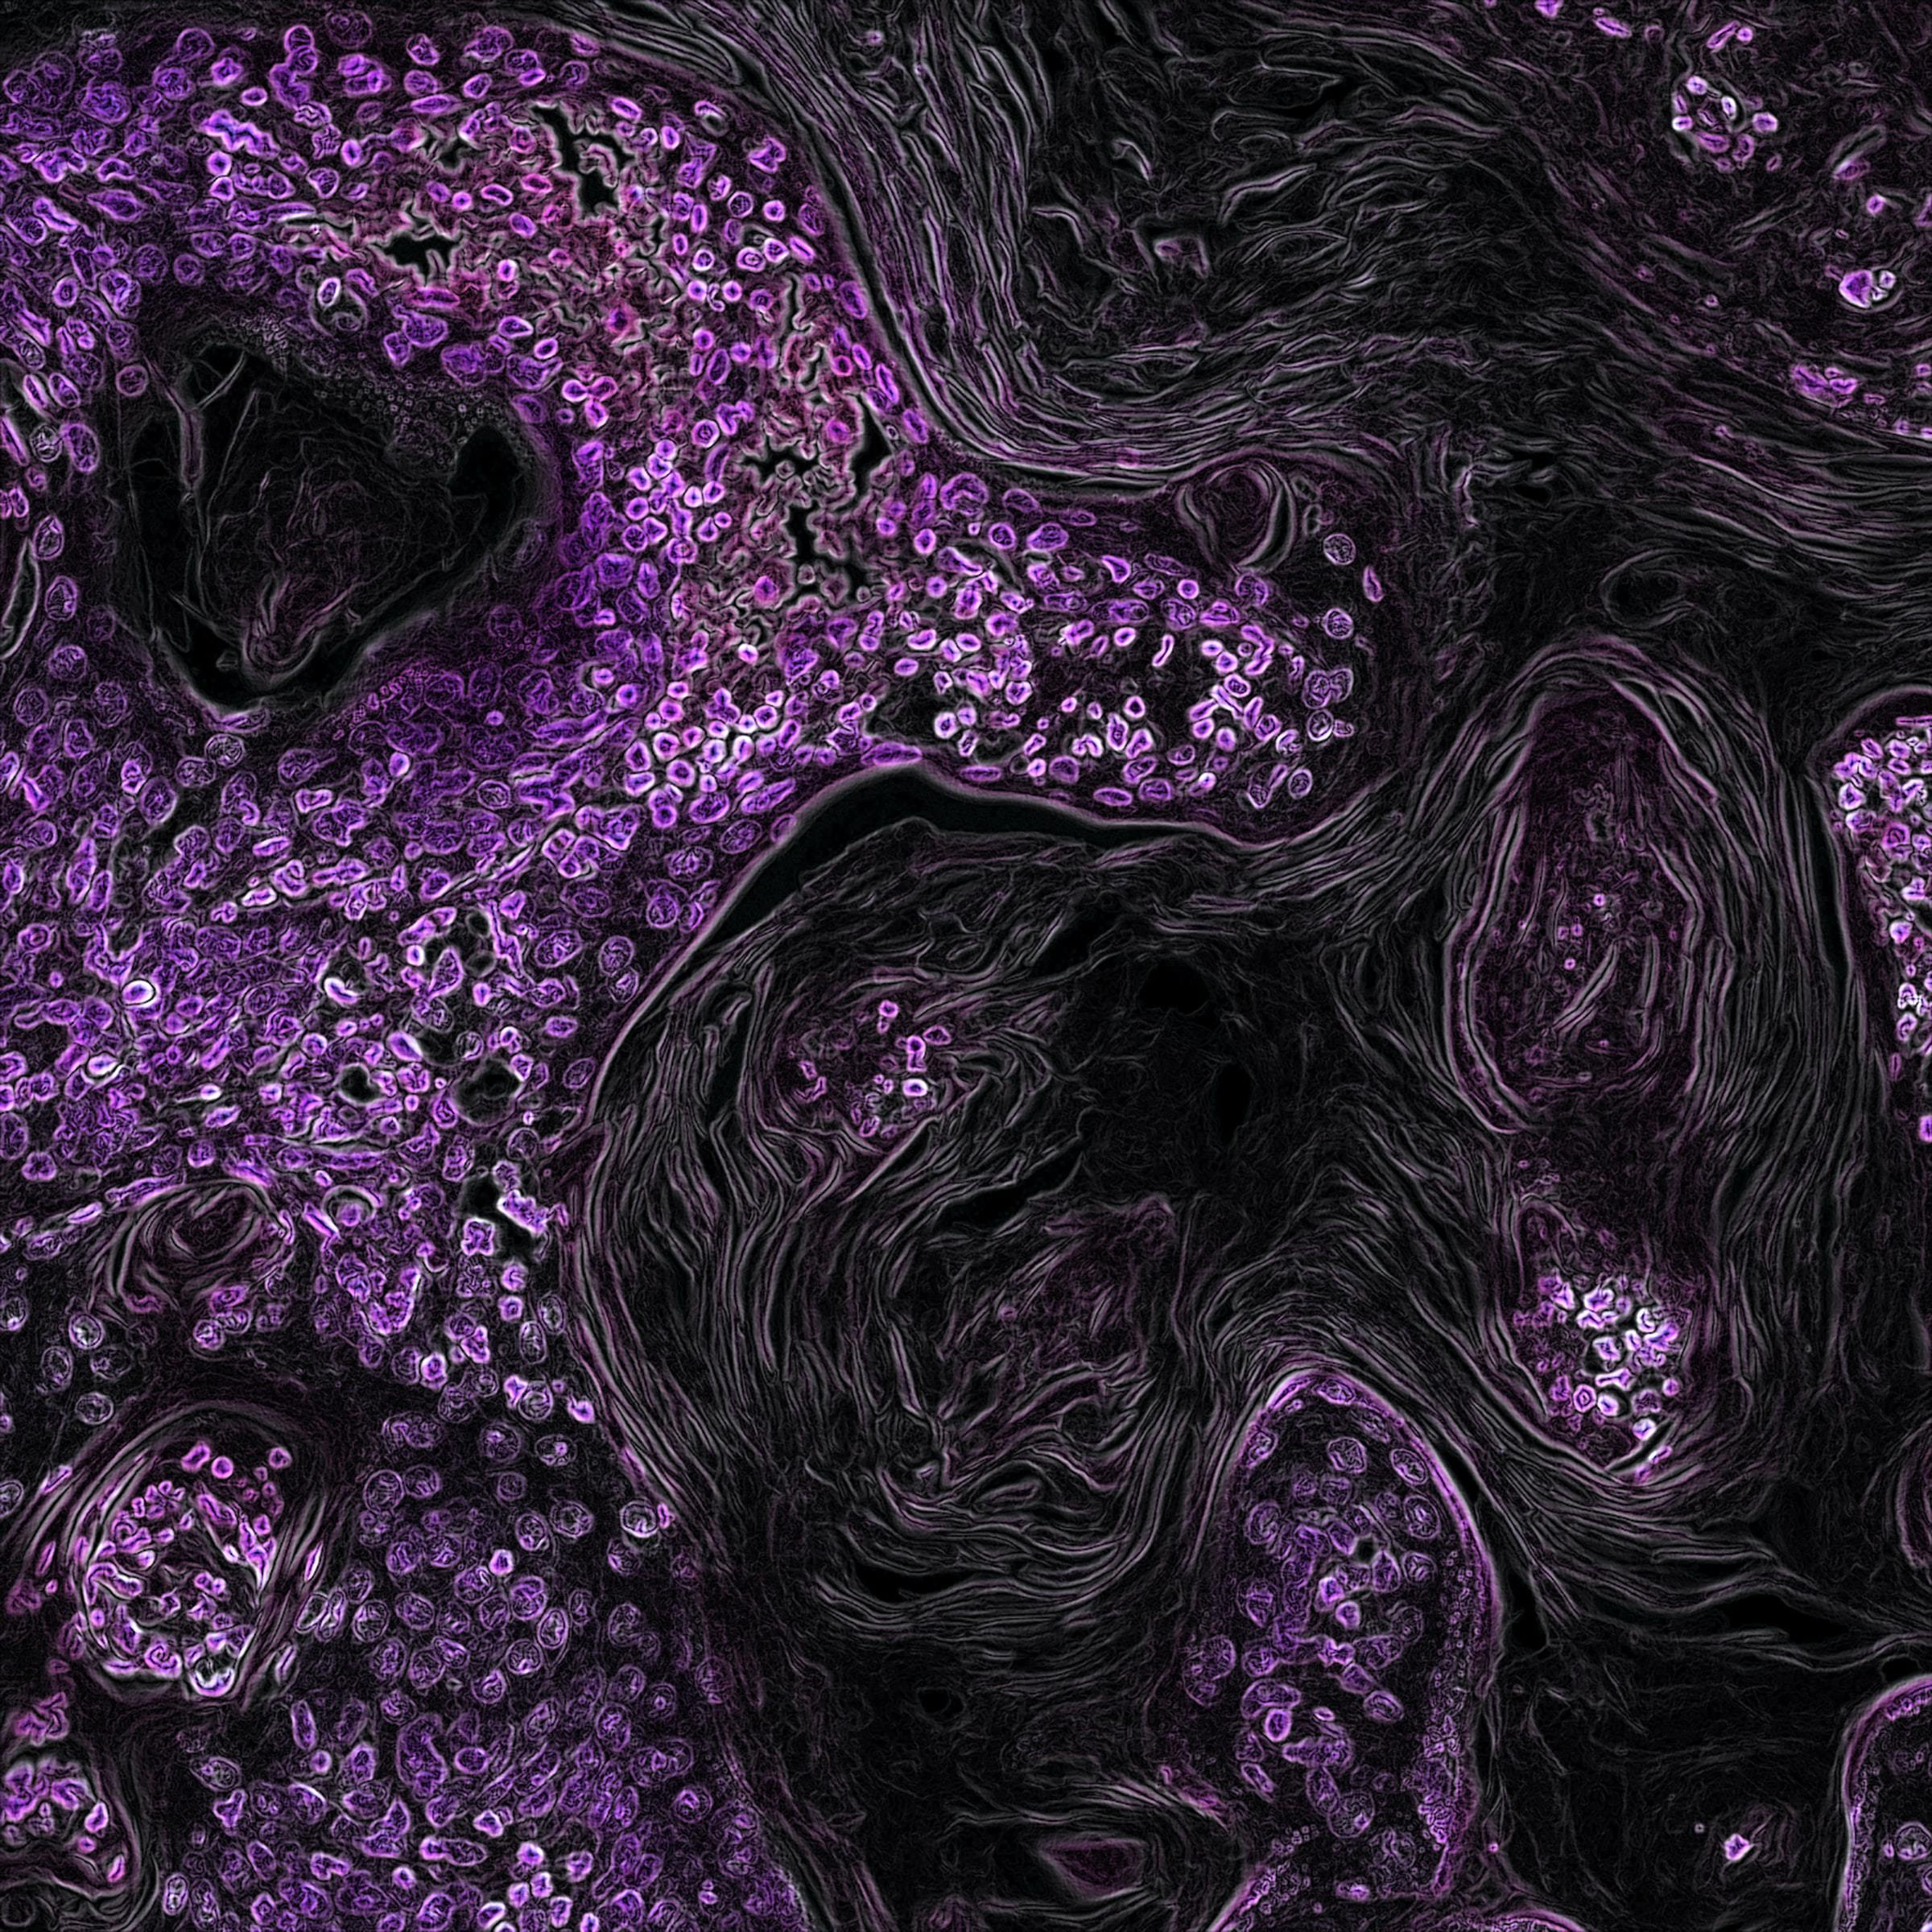 A close-up image of lung cancer shows masses of irregular oval cells clustered beside swirls of long, thin cells.